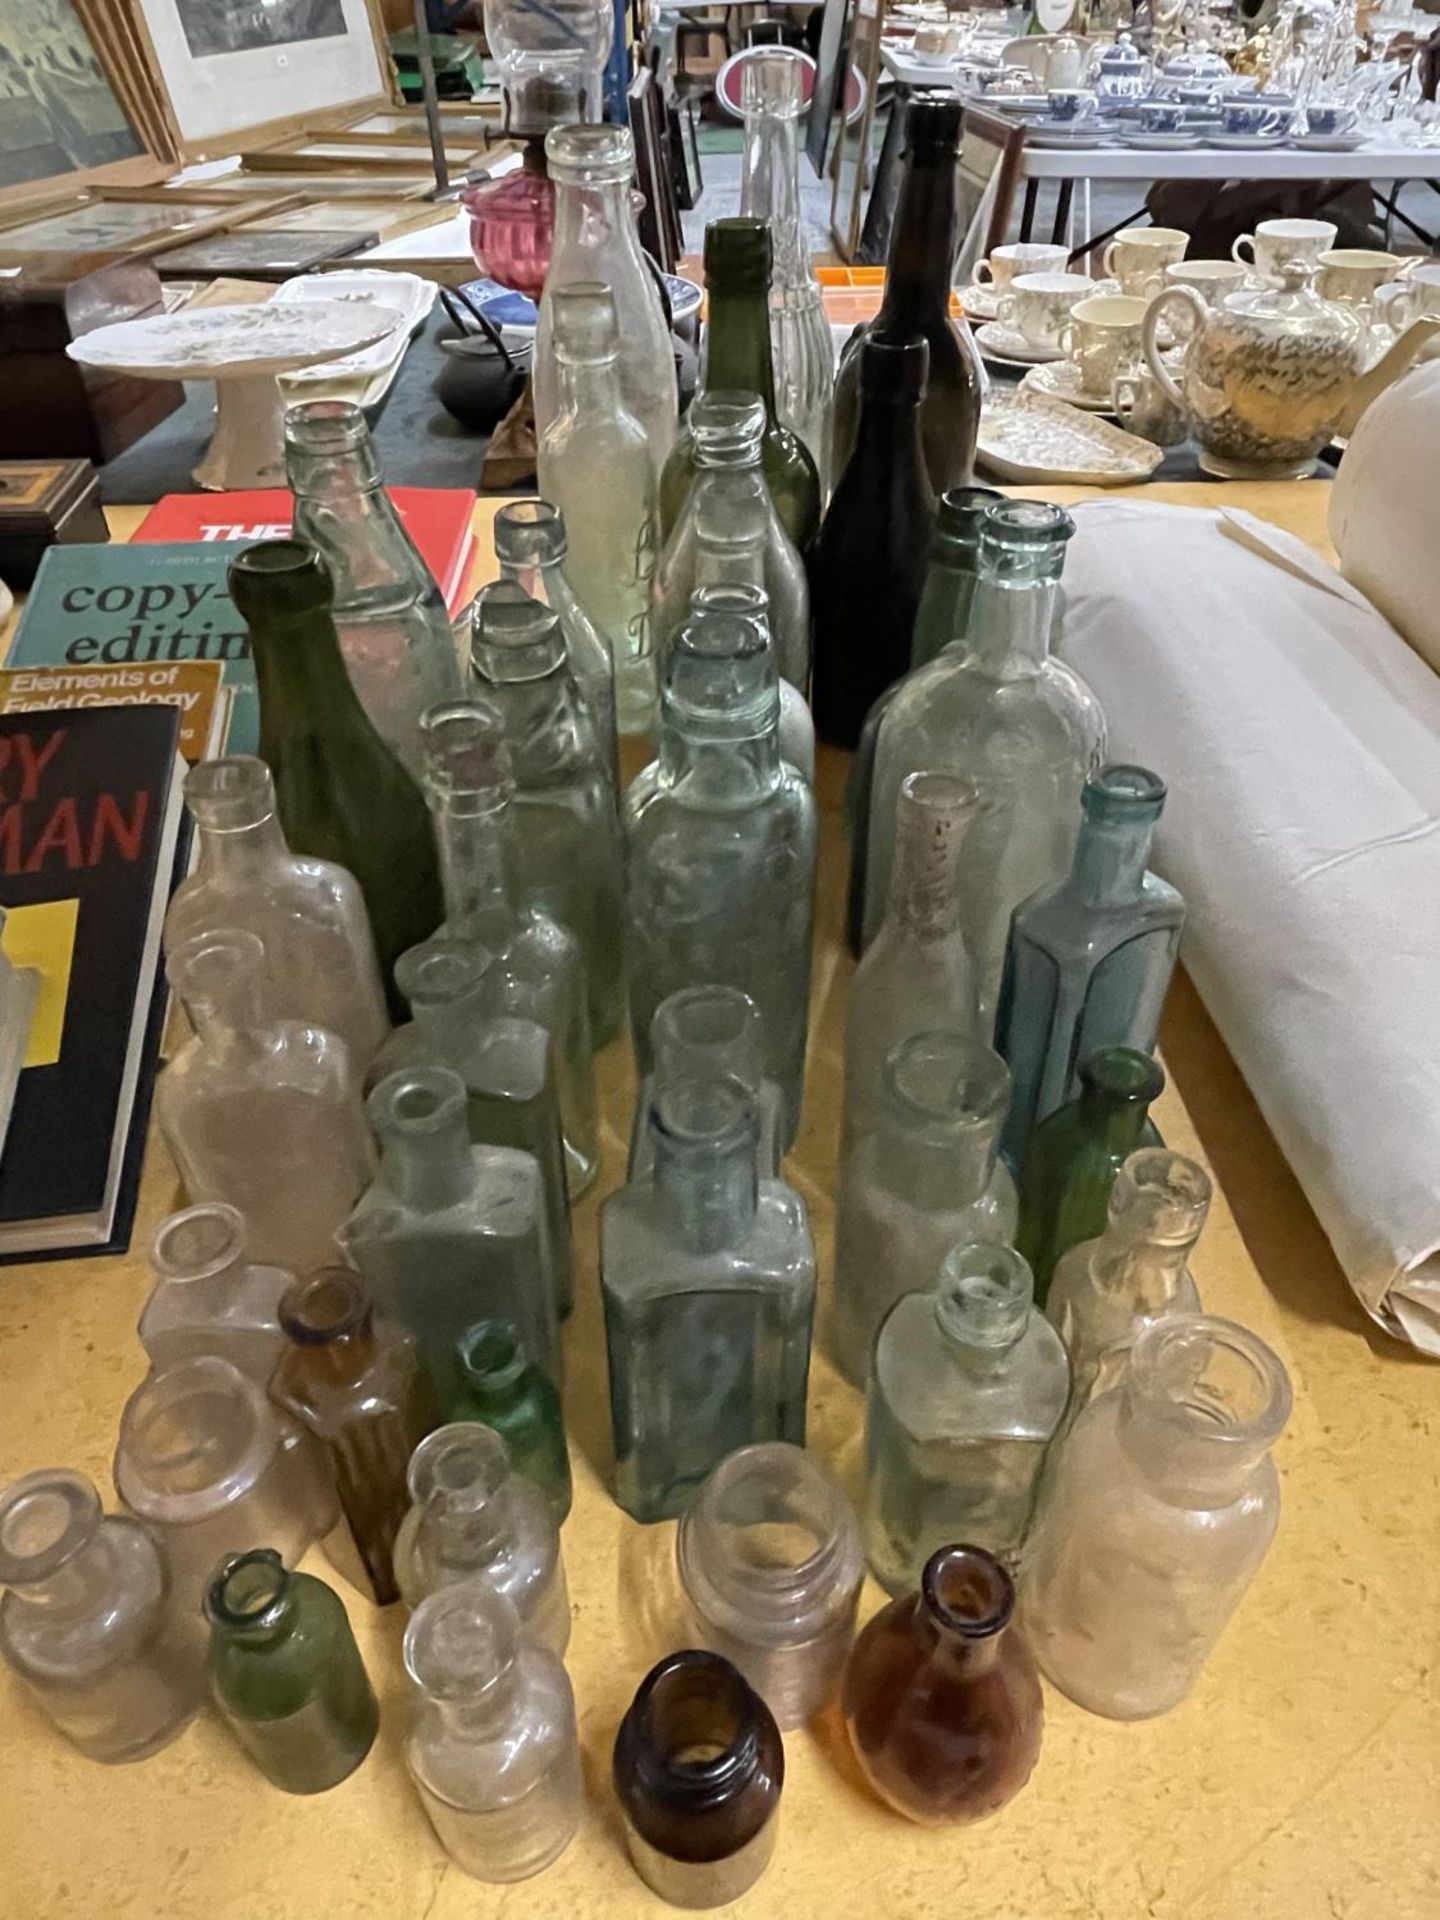 A LARGE QUANTITY OF VINTAGE GLASS BOTTLES TO INCLUDE SOME WITH GLASS MARBLES